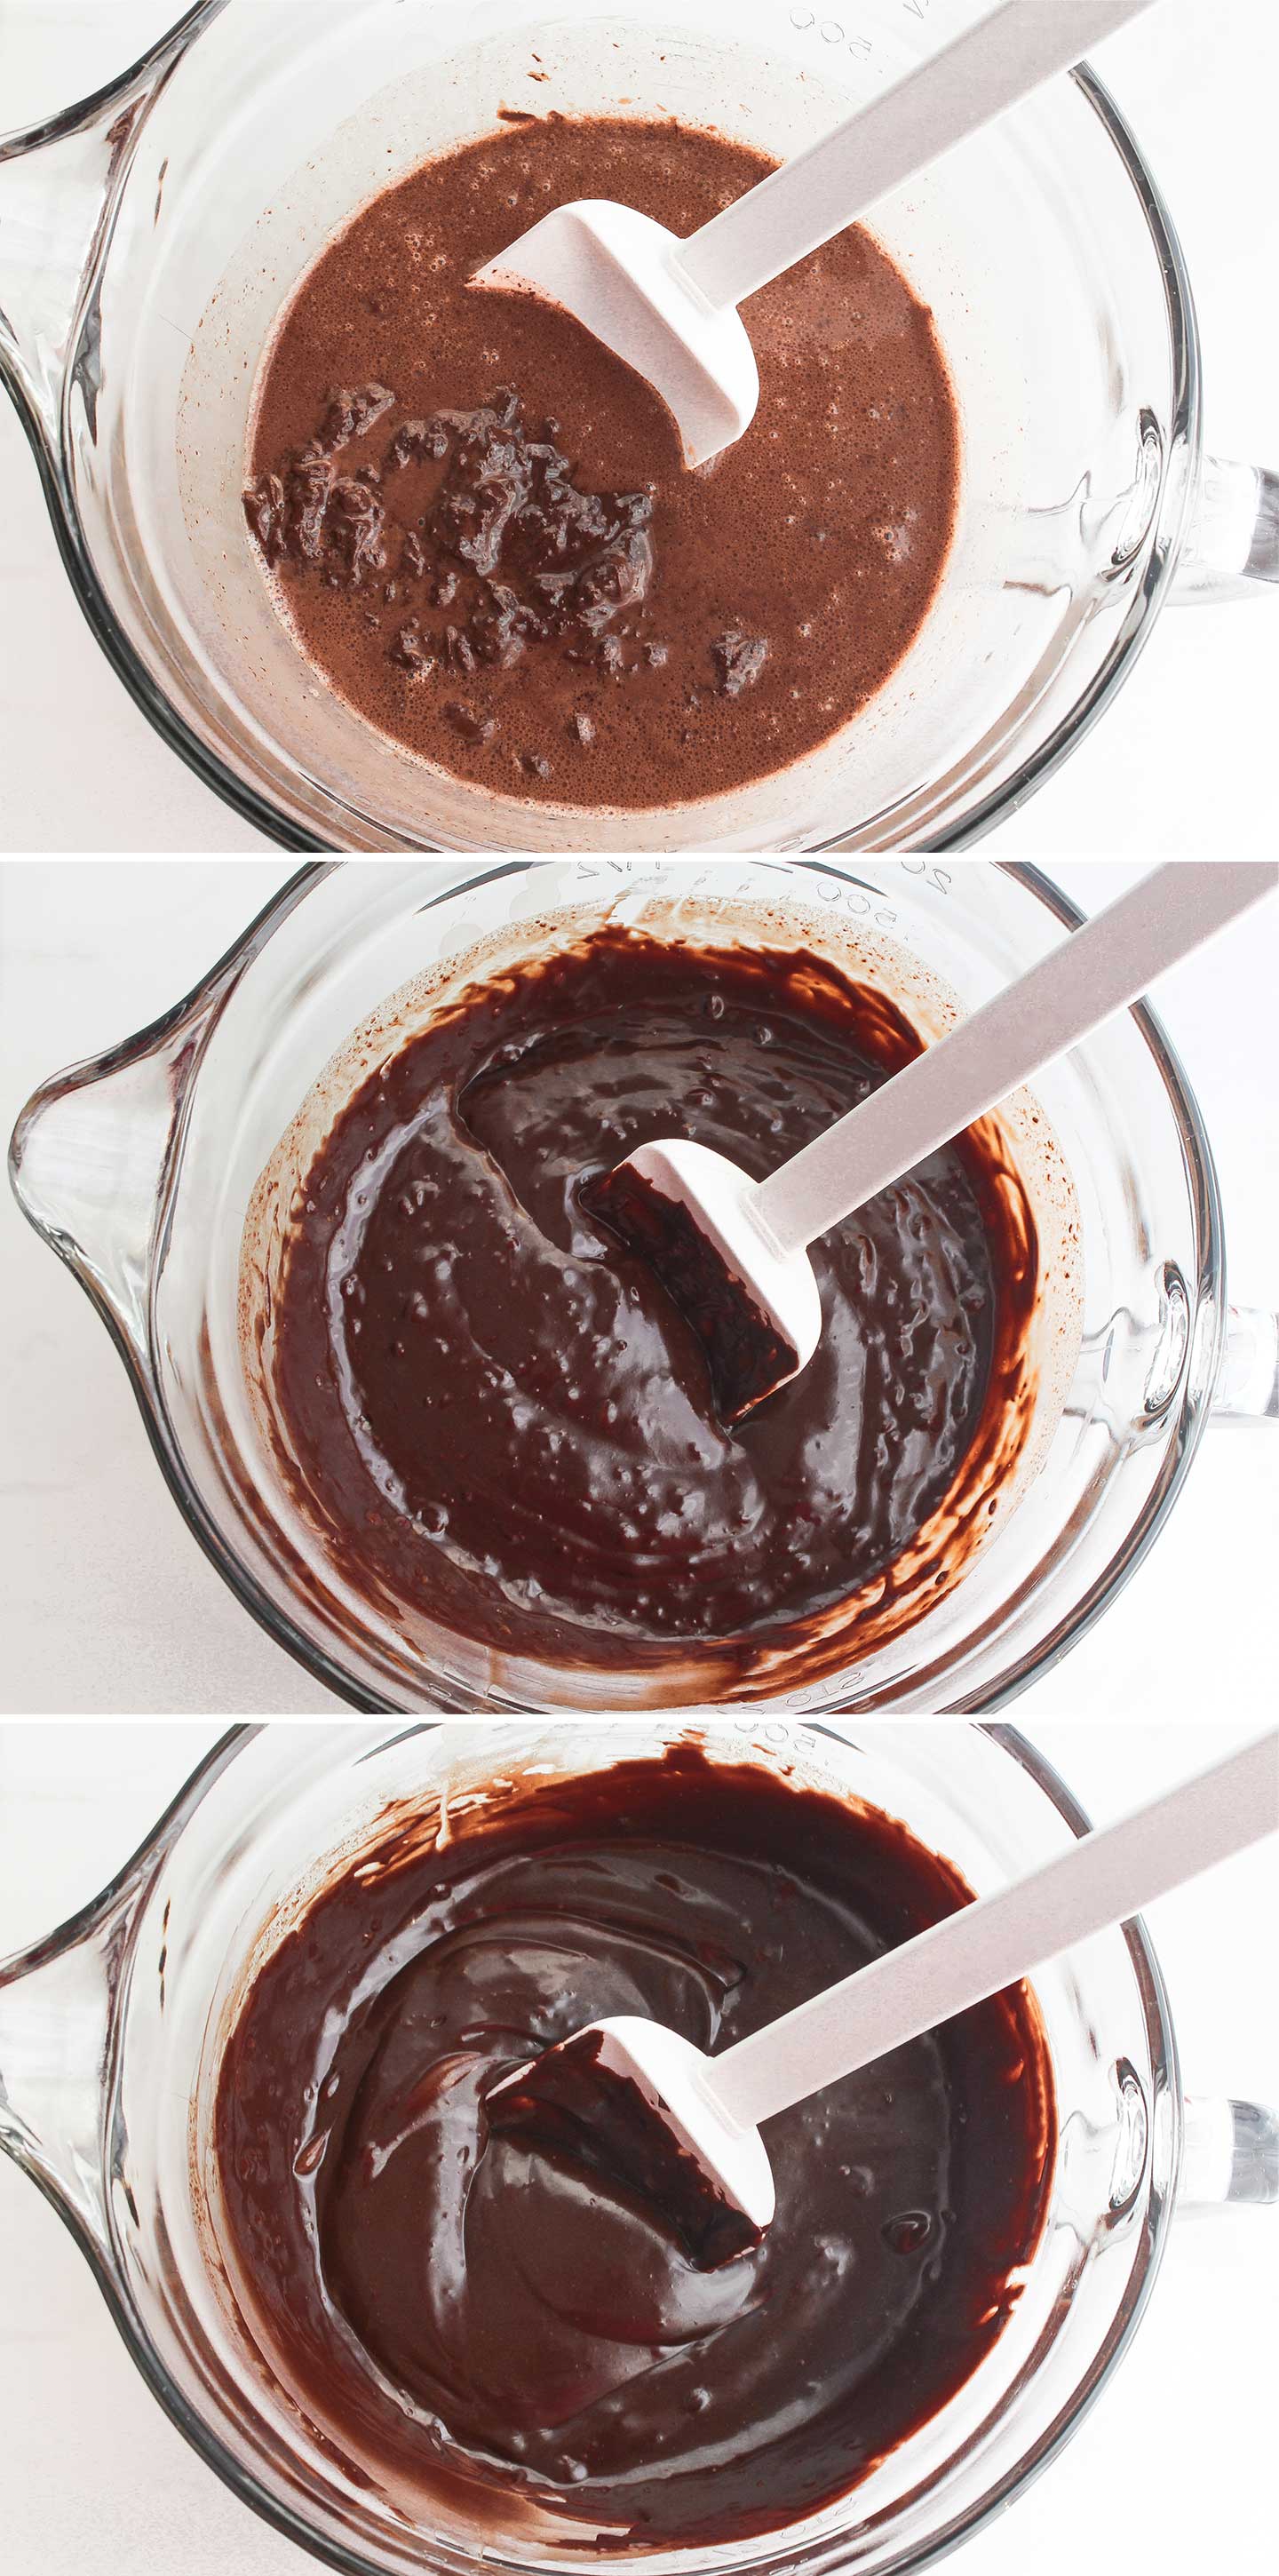 Collage of 3 photos showing how to make microwave fudge by gently warming the ingredients and then stirring patiently until all the chocolate is finally melted and smooth.